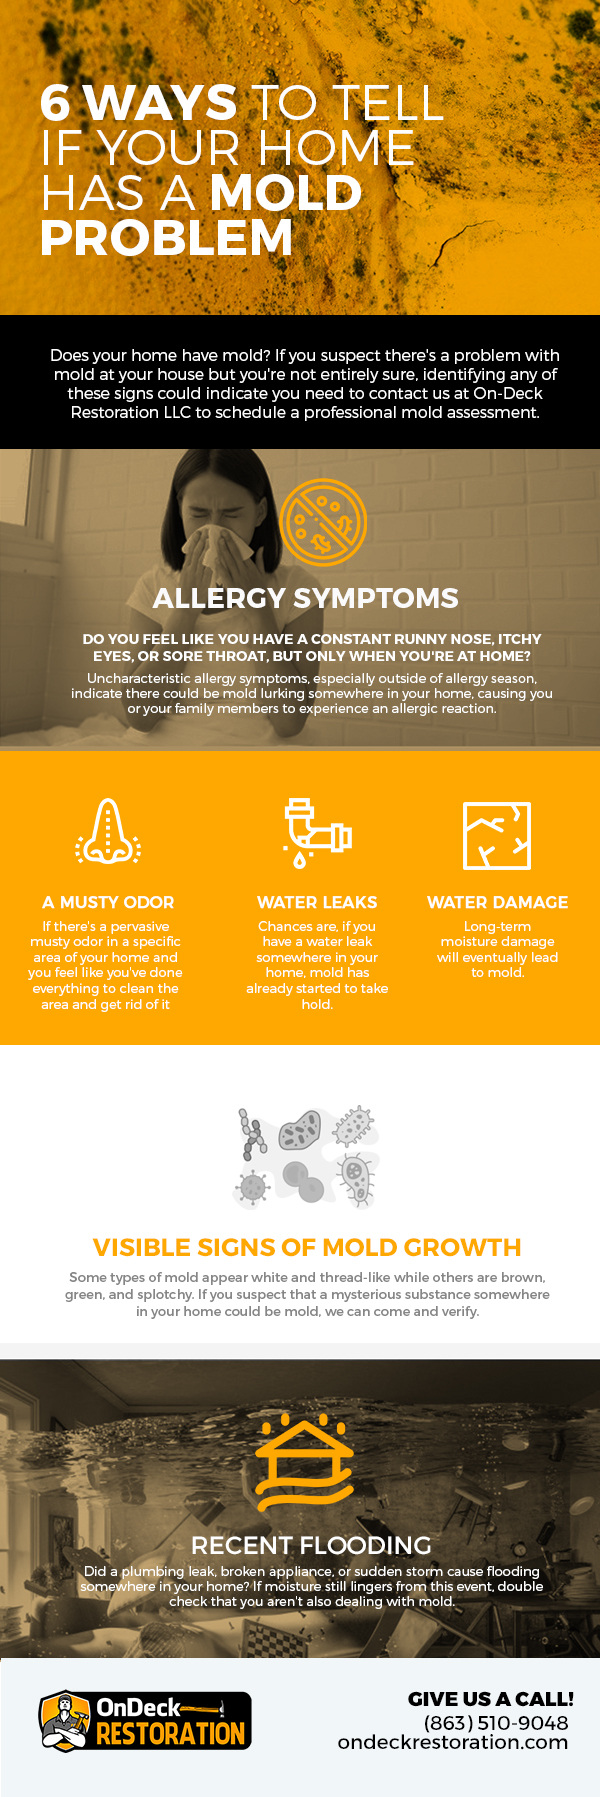 6 Ways to Tell if Your Home Has a Mold Problem [infographic]